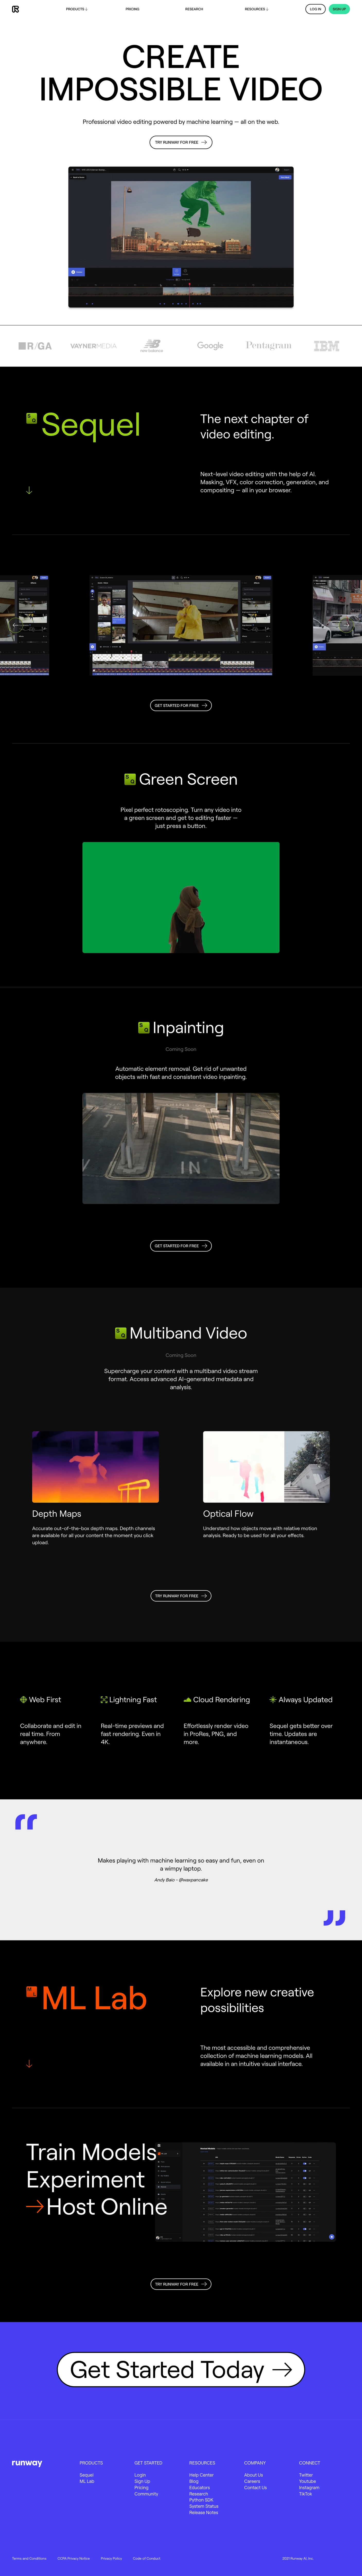 Runway Landing Page Example: Create impossible video. Professional video editing powered by machine learning — all on the web.